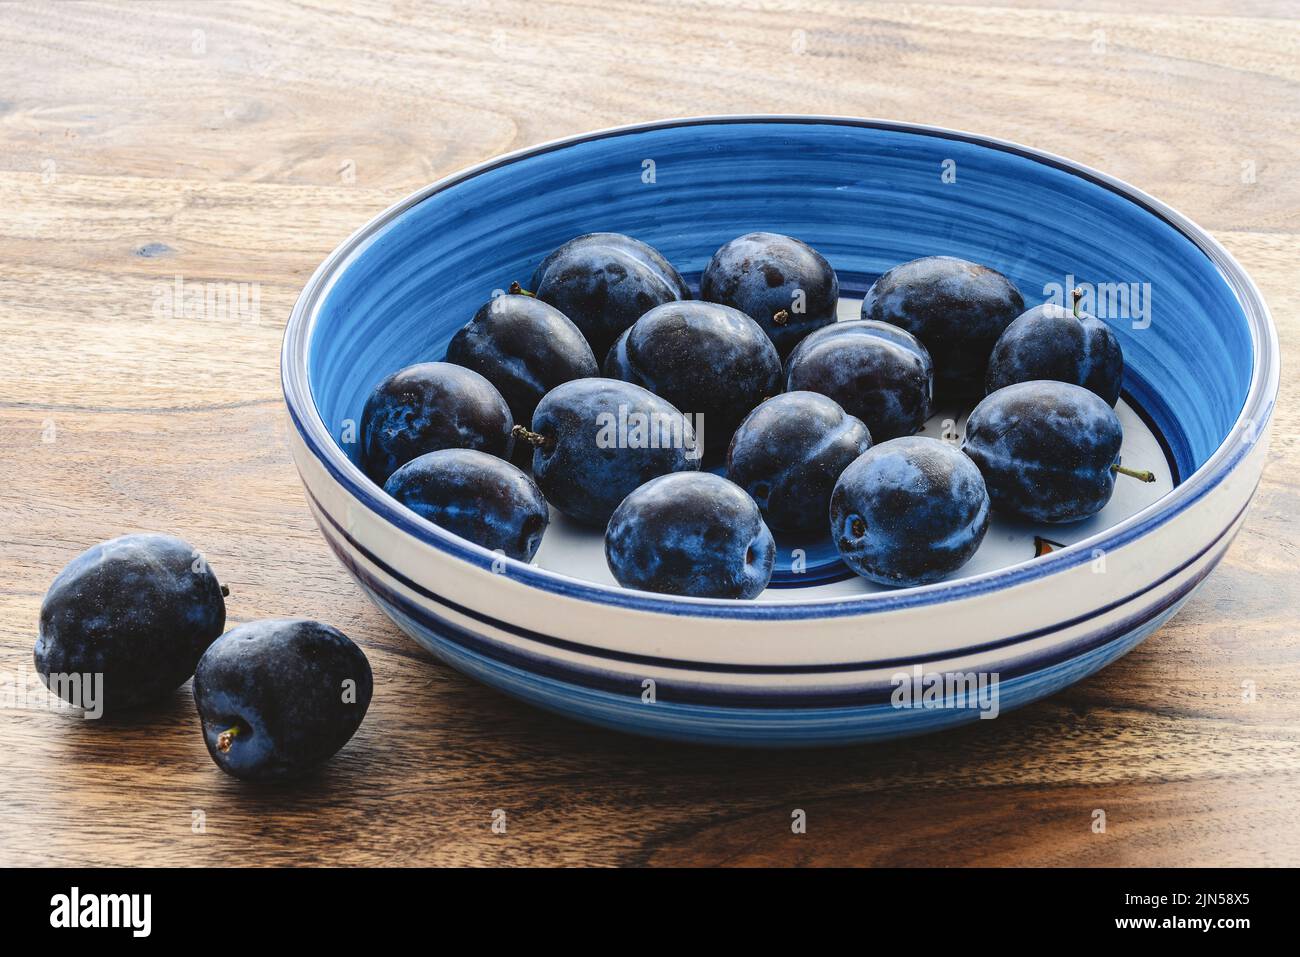 blue pottery bowl filled with fresh ripe prune plums on rustic wooden table Stock Photo